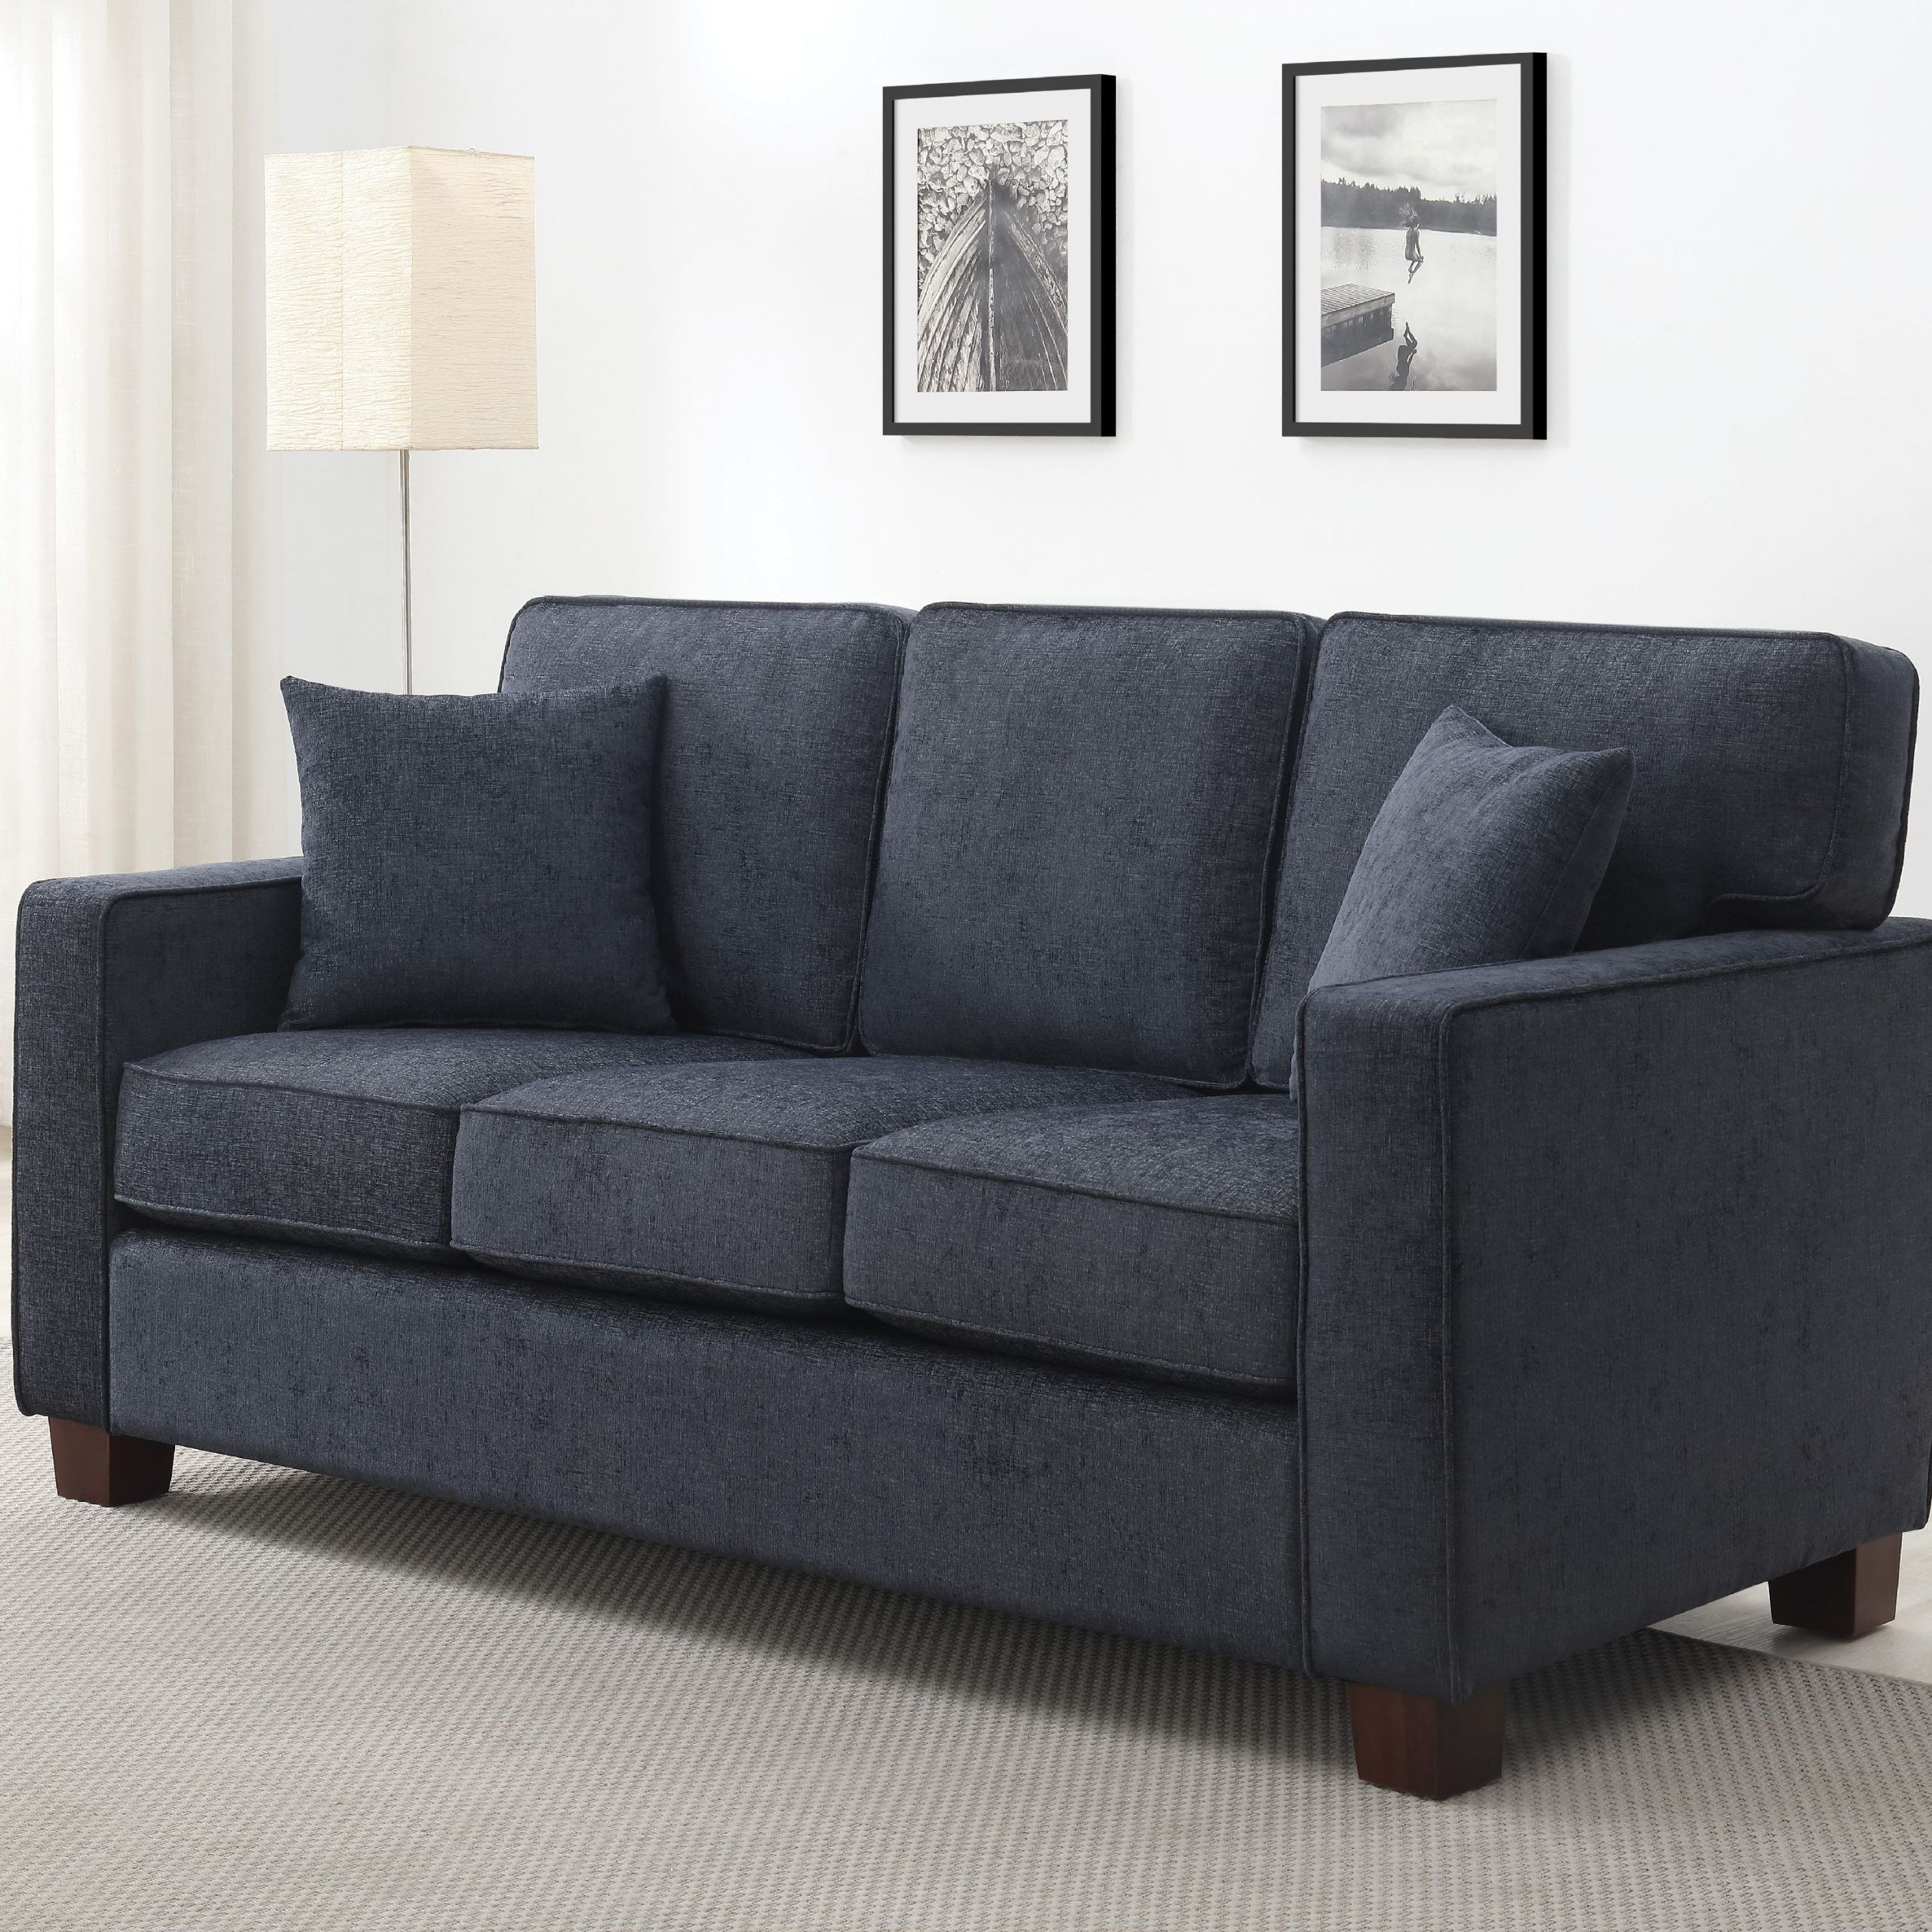 Well Known Osp Home Furnishings Russell 3 Seater Sofa In Navy Fabric 3/ctn Throughout Navy Linen Coil Sofas (View 9 of 15)